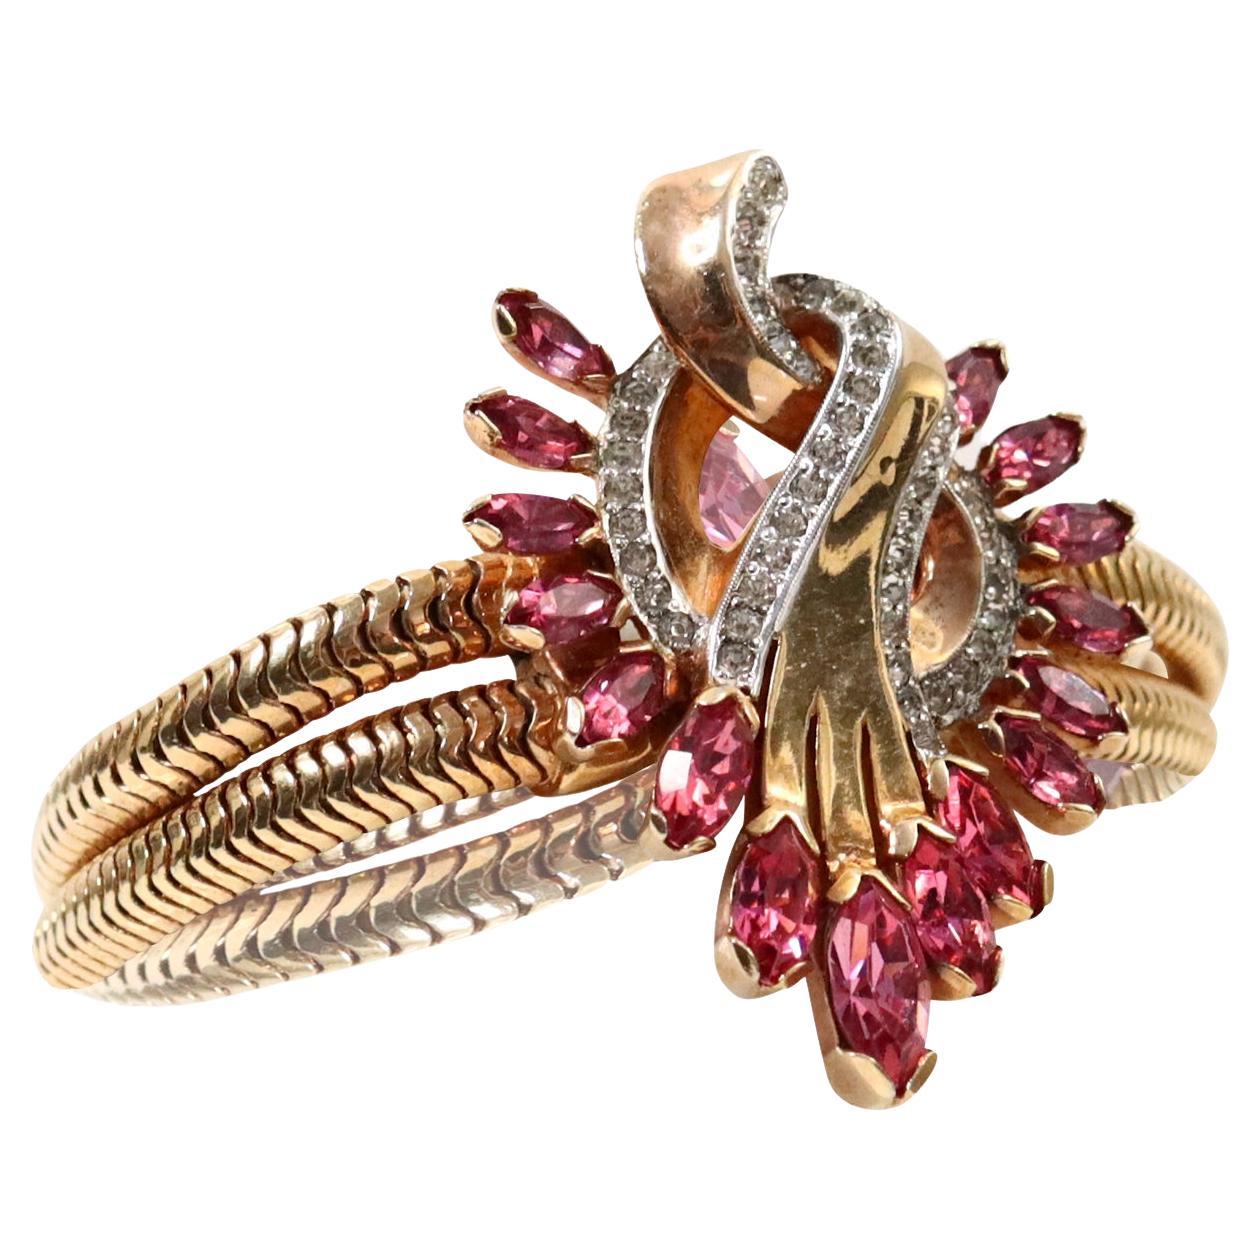 Vintage Mazer Gold and Diamante With Pink Bracelet, circa 1960s.  This is one of the prettiest and most well made bracelets in the collection. This looks like fine jewelry at its best. There are two pieces of snake like that have a large medallion